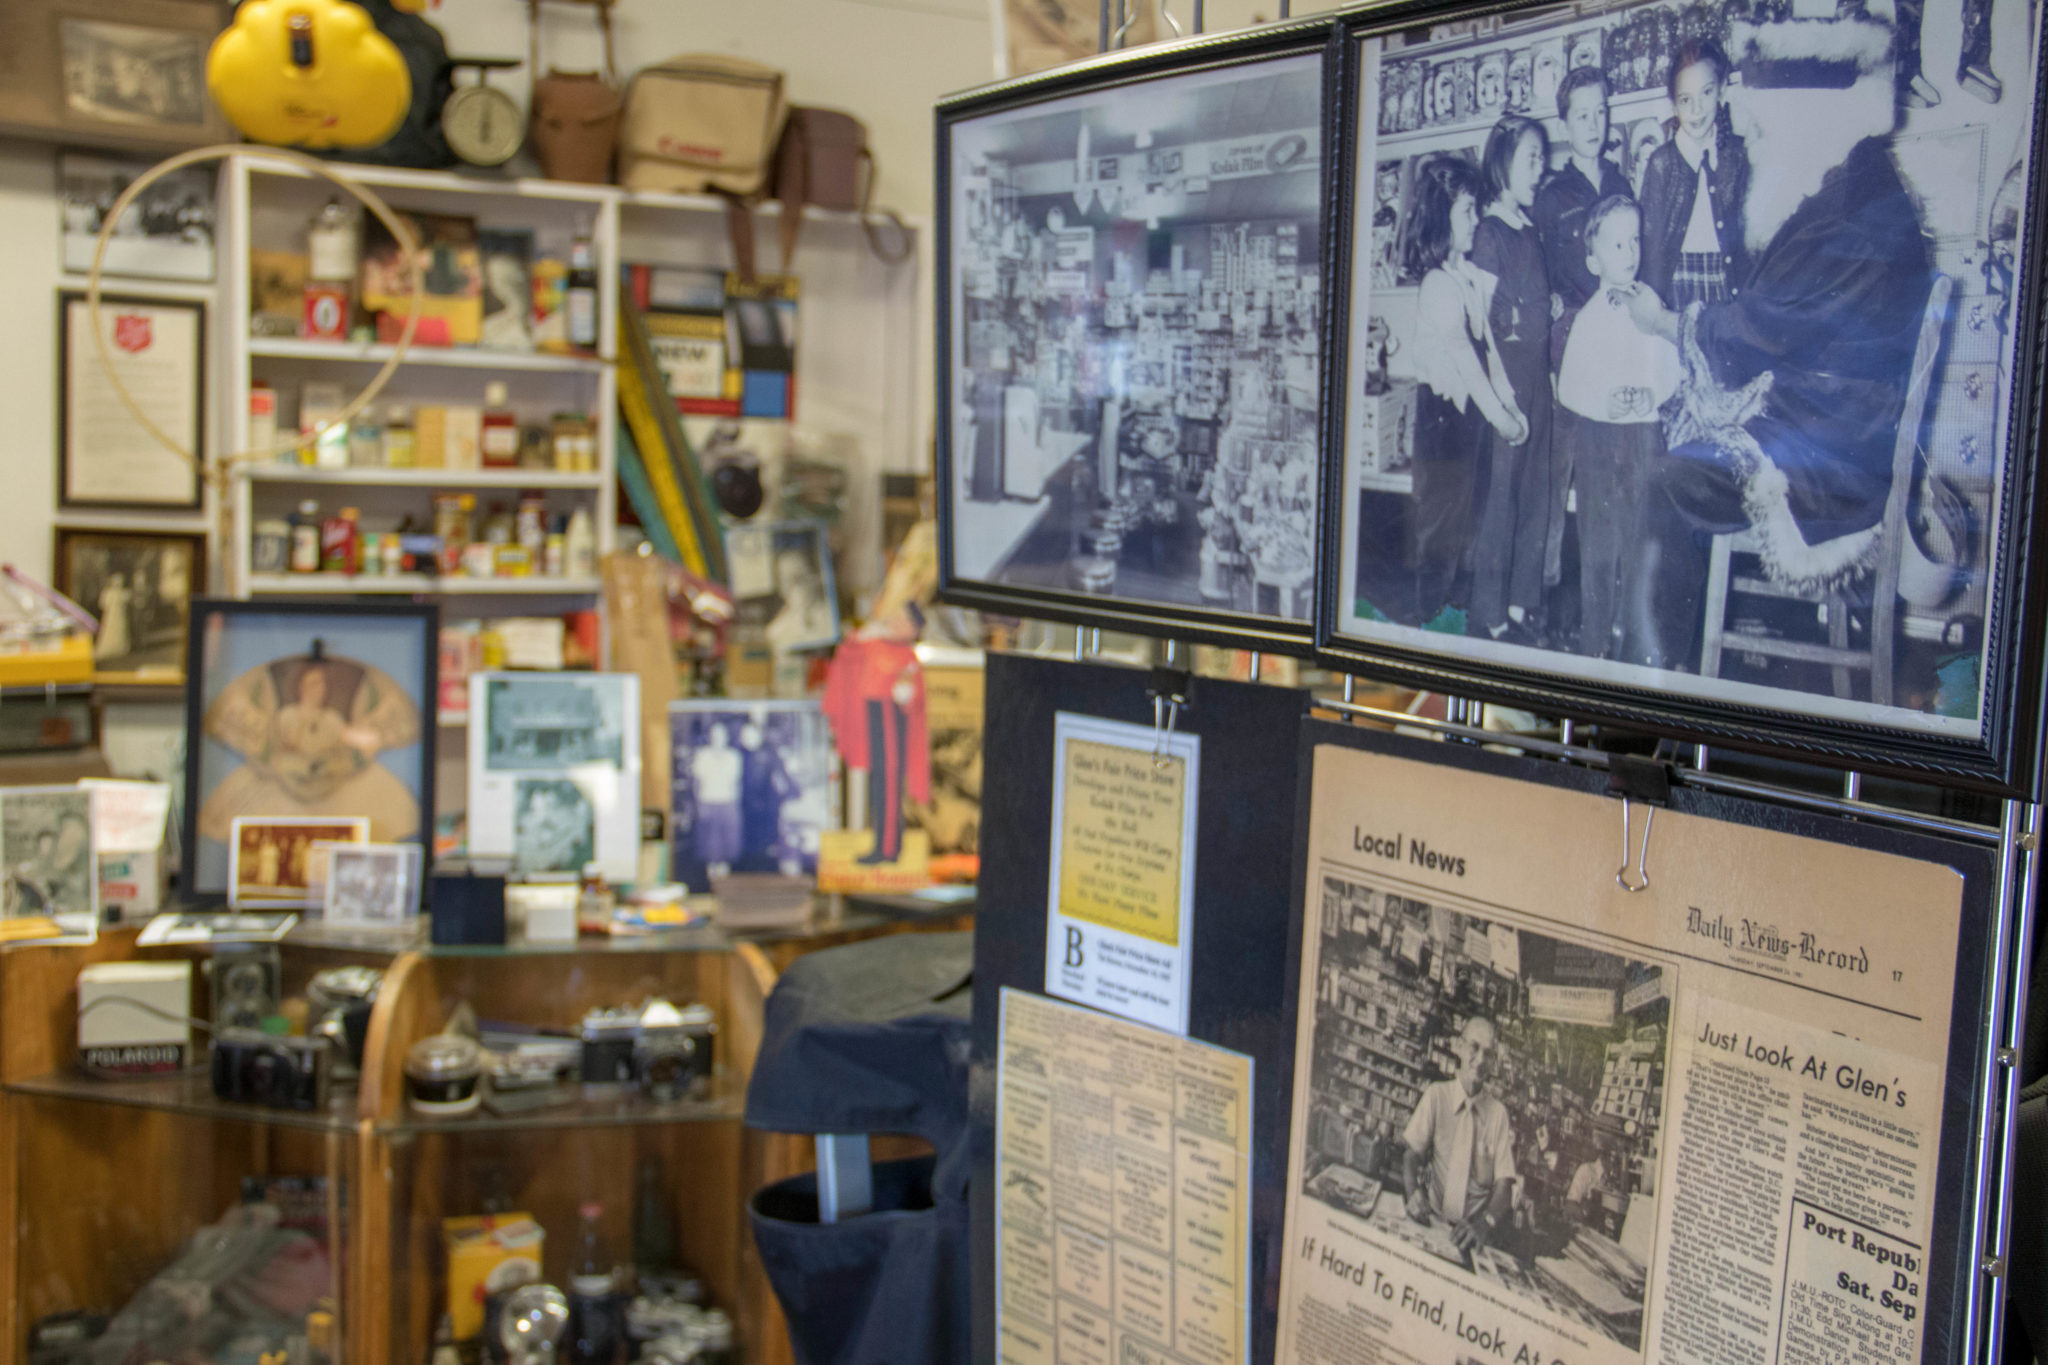 Newspapers and photos of Glens Fair Price Store